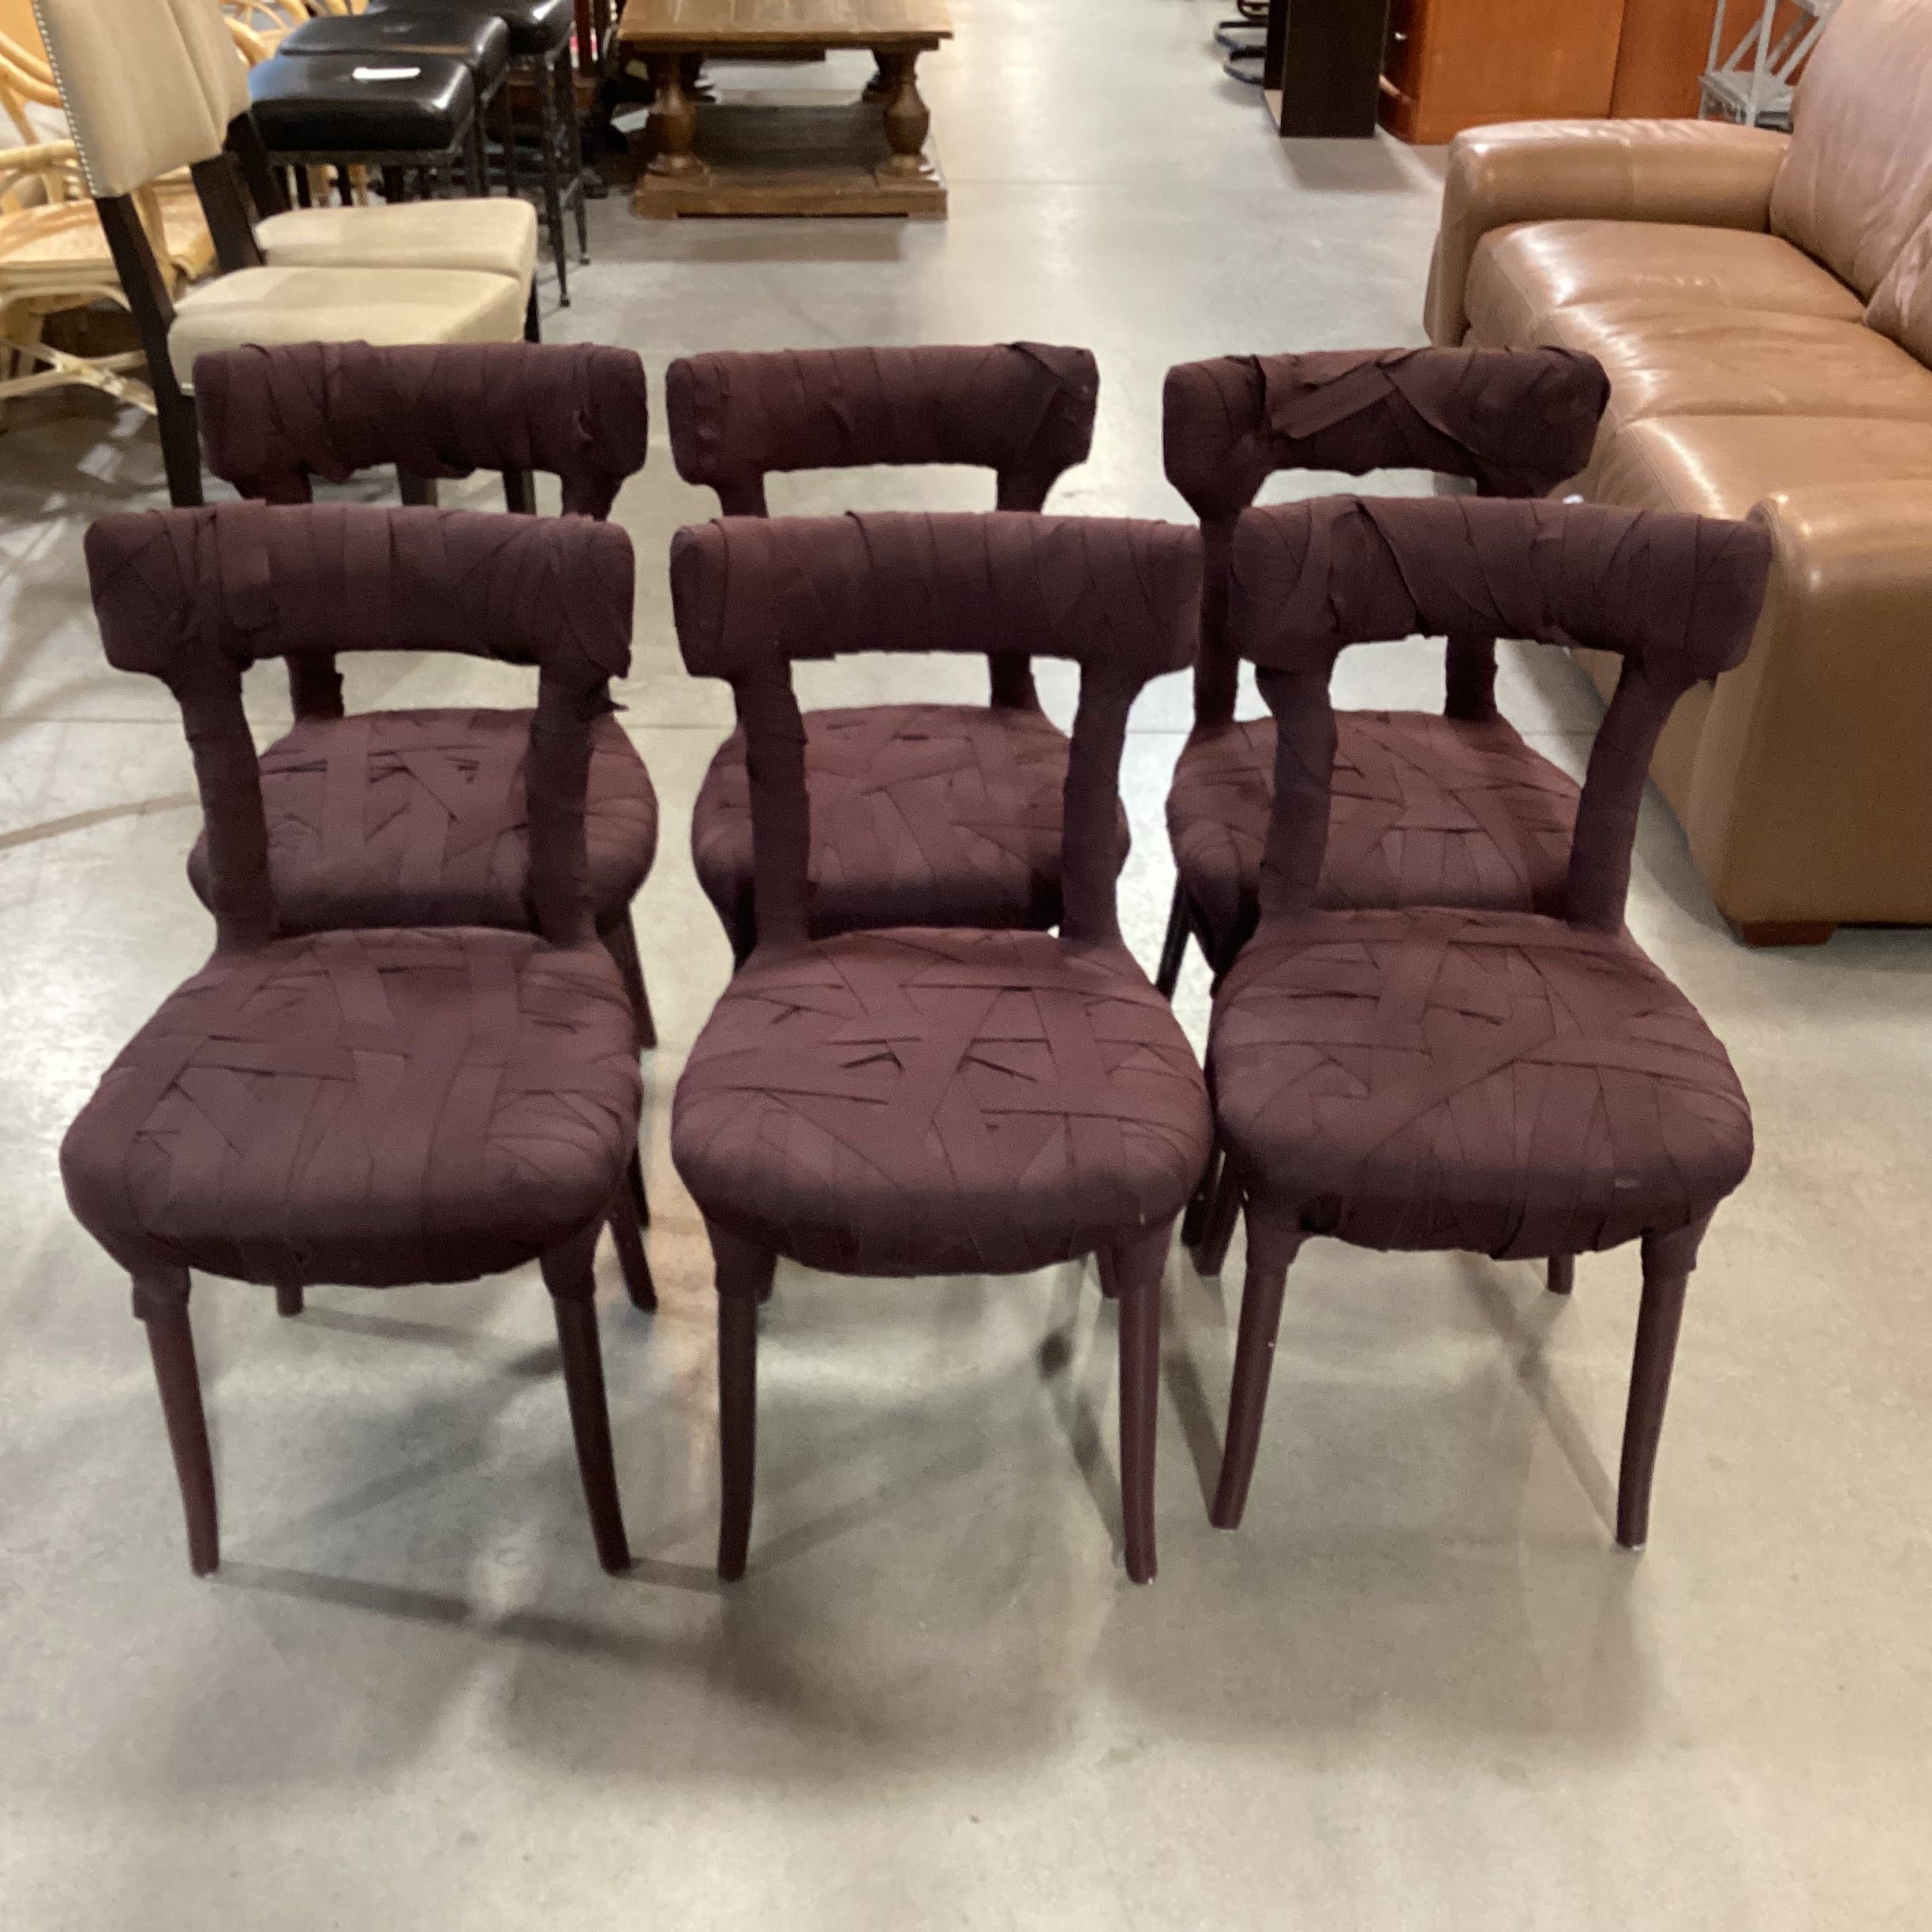 Peter Traag for Edra Purple Bandage Mummy Dining Chairs